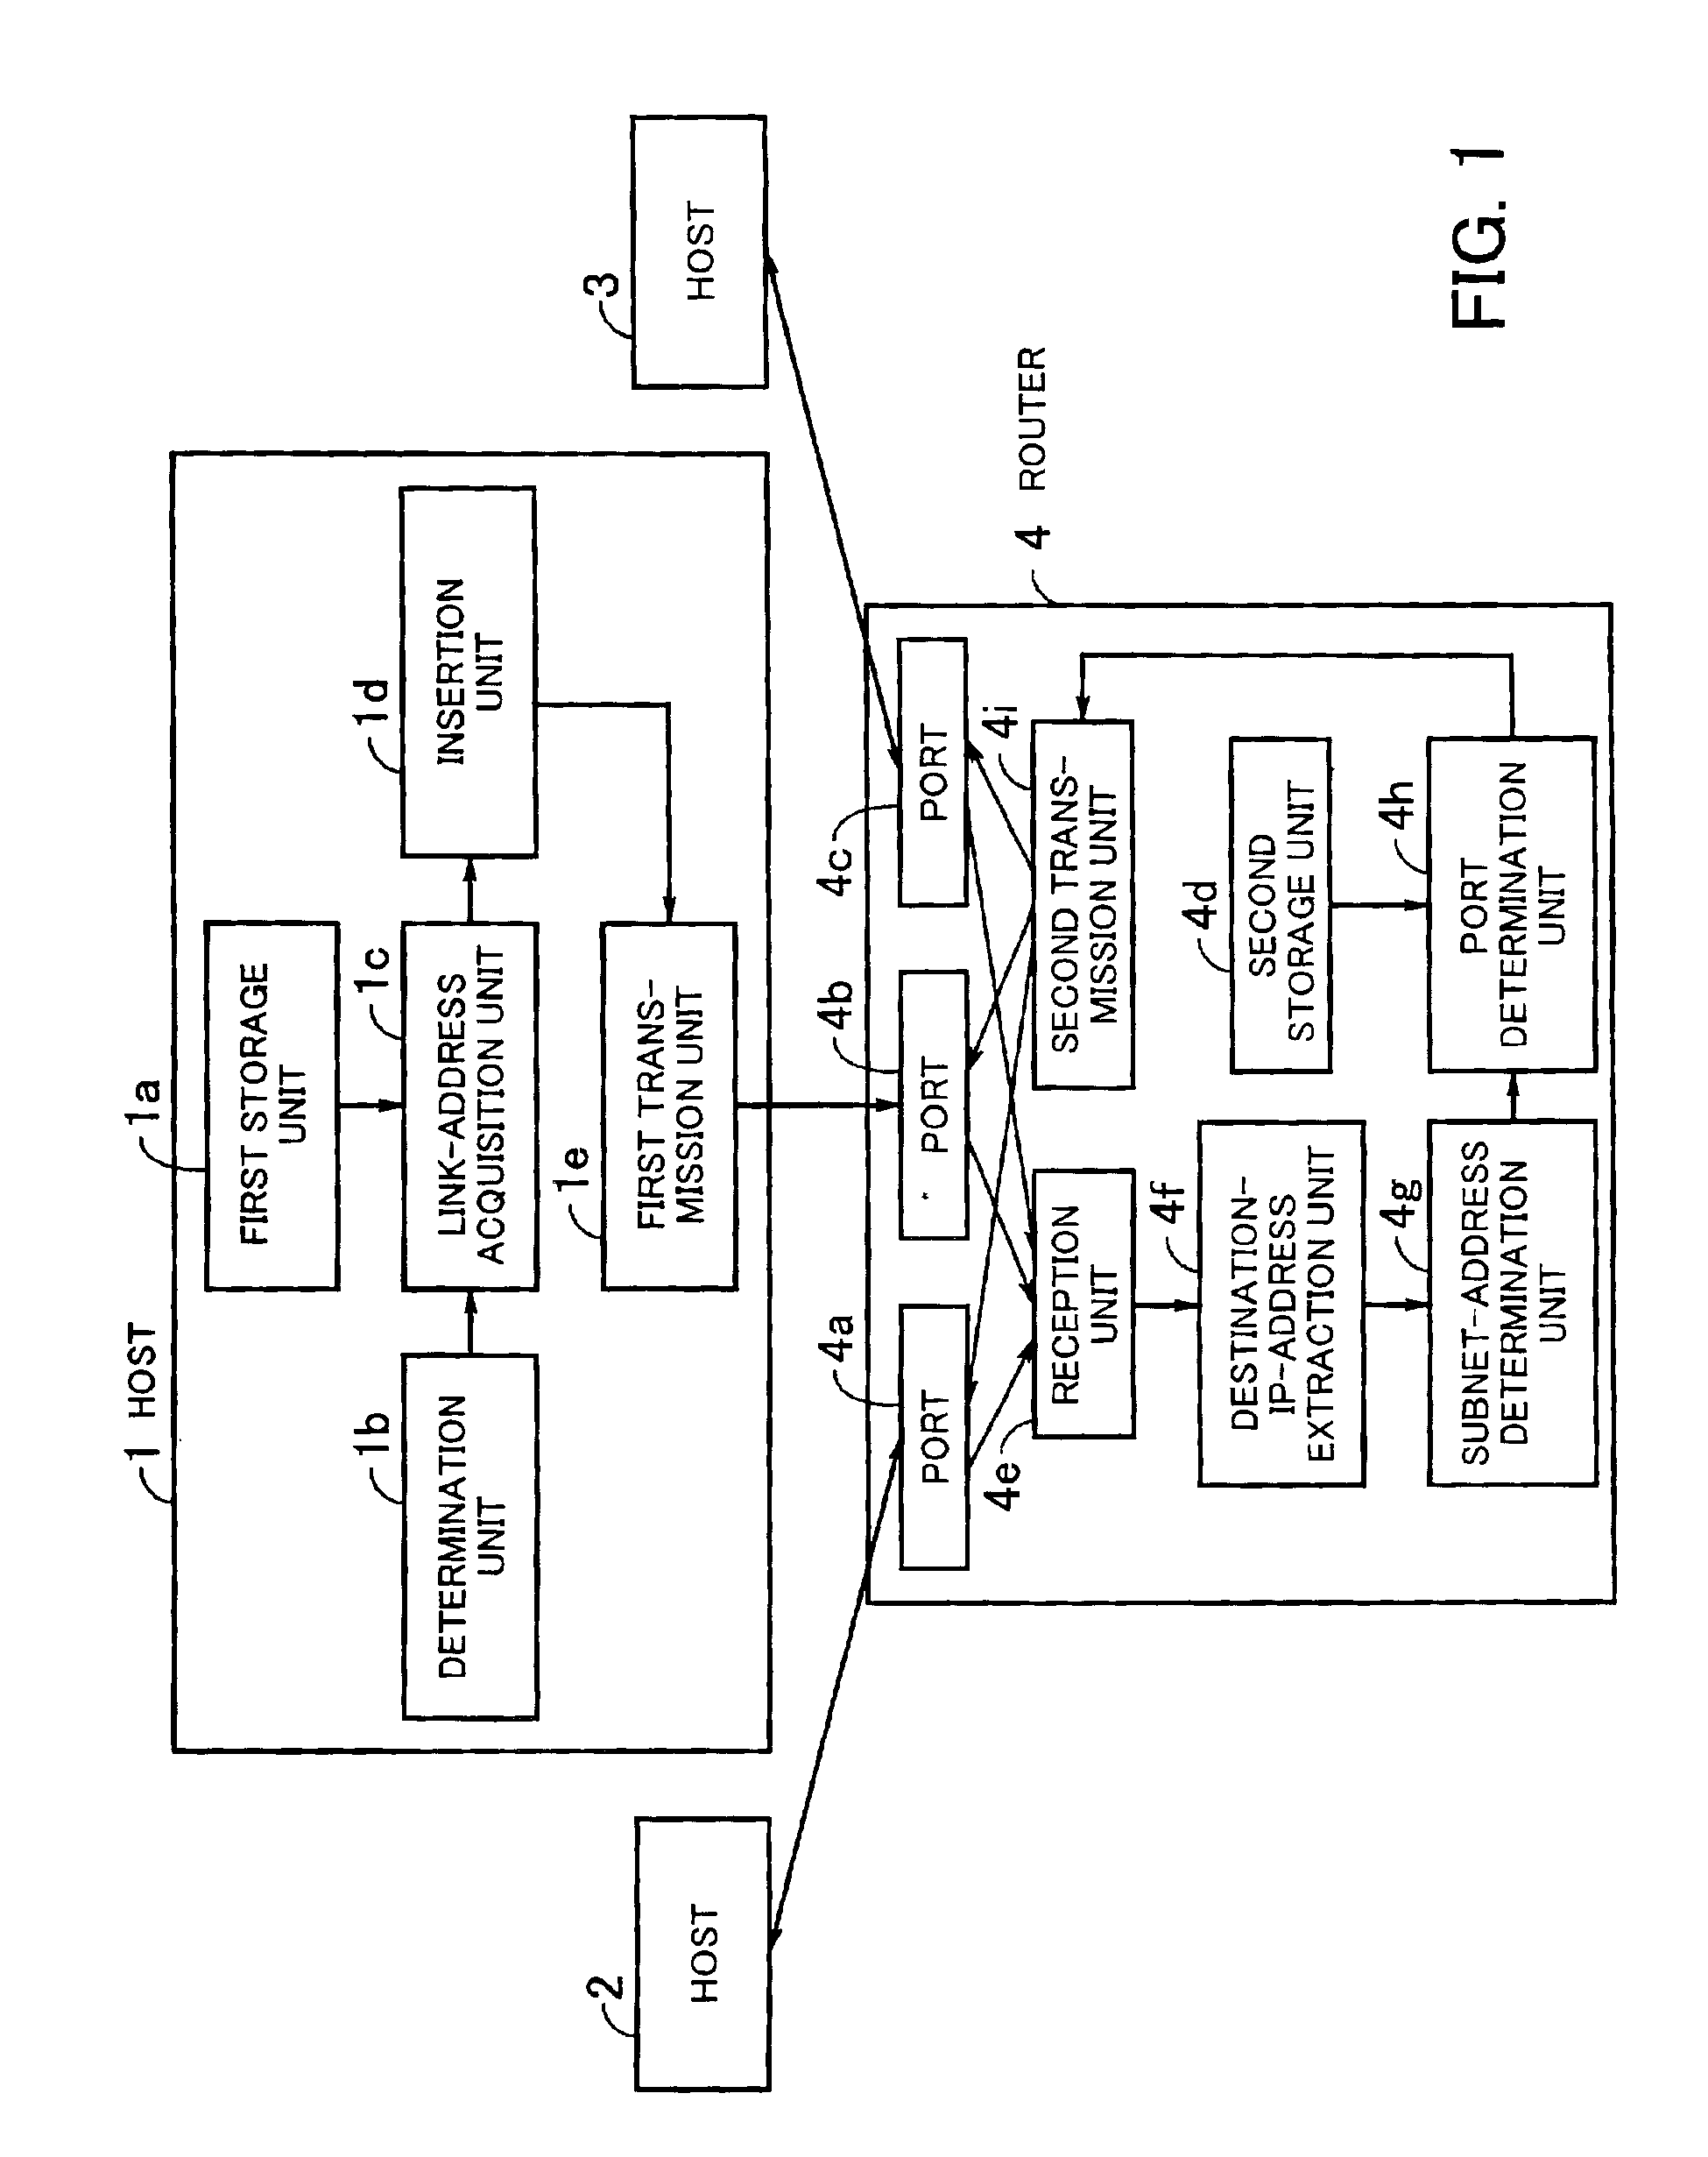 Packet transmission system in which packet is transferred without replacing address in the packet